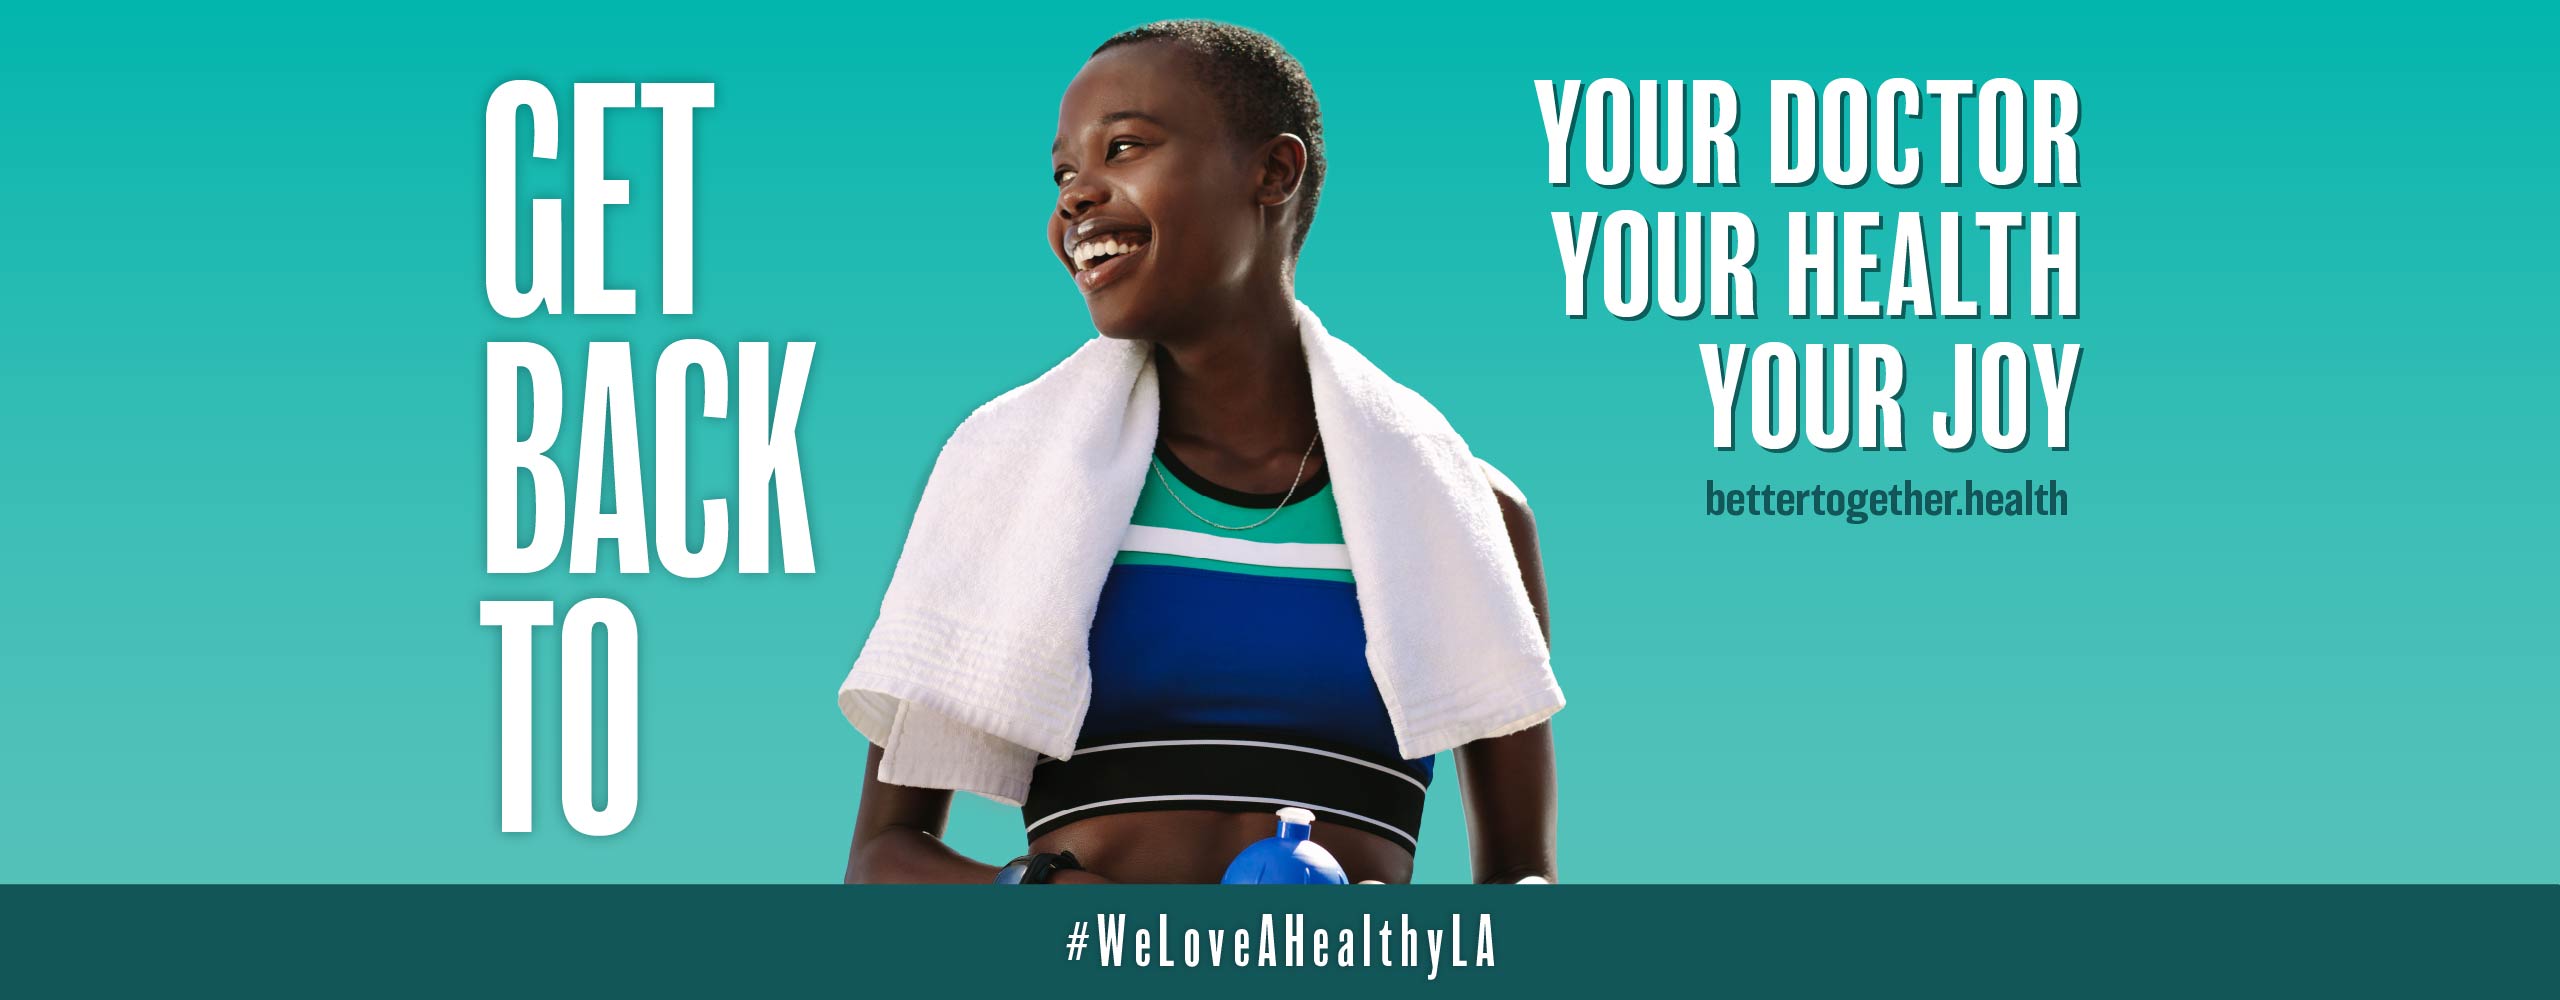 Words: Get Back to your doctor, your health, your joy. Woman in workout clothes, smiling - #WeLoveAHealthyLA